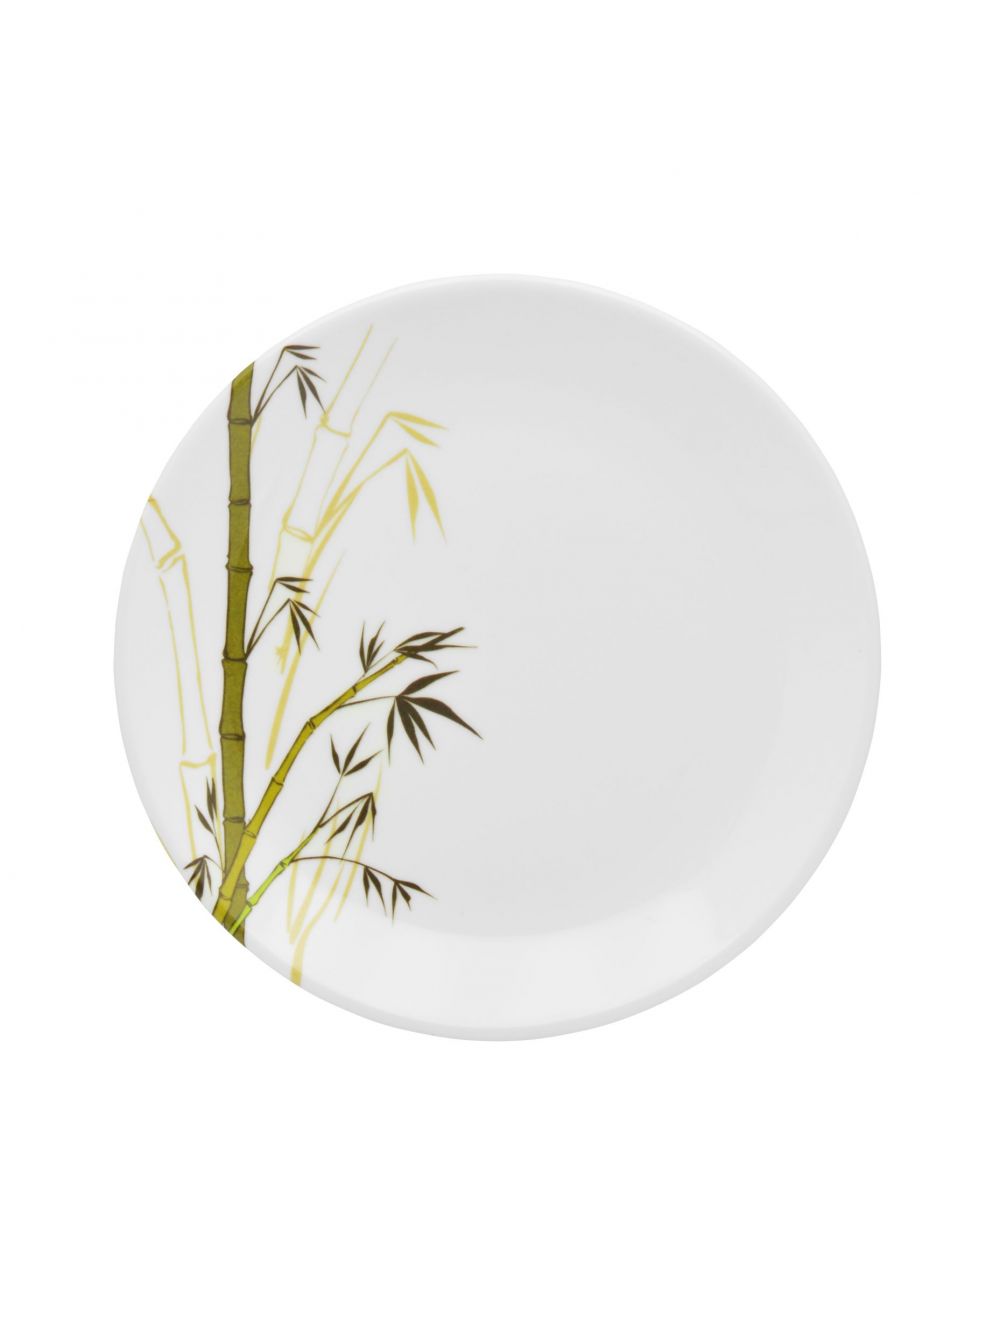 Dinewell Melamine Side Plate Green Bamboo-DWHP3090GB